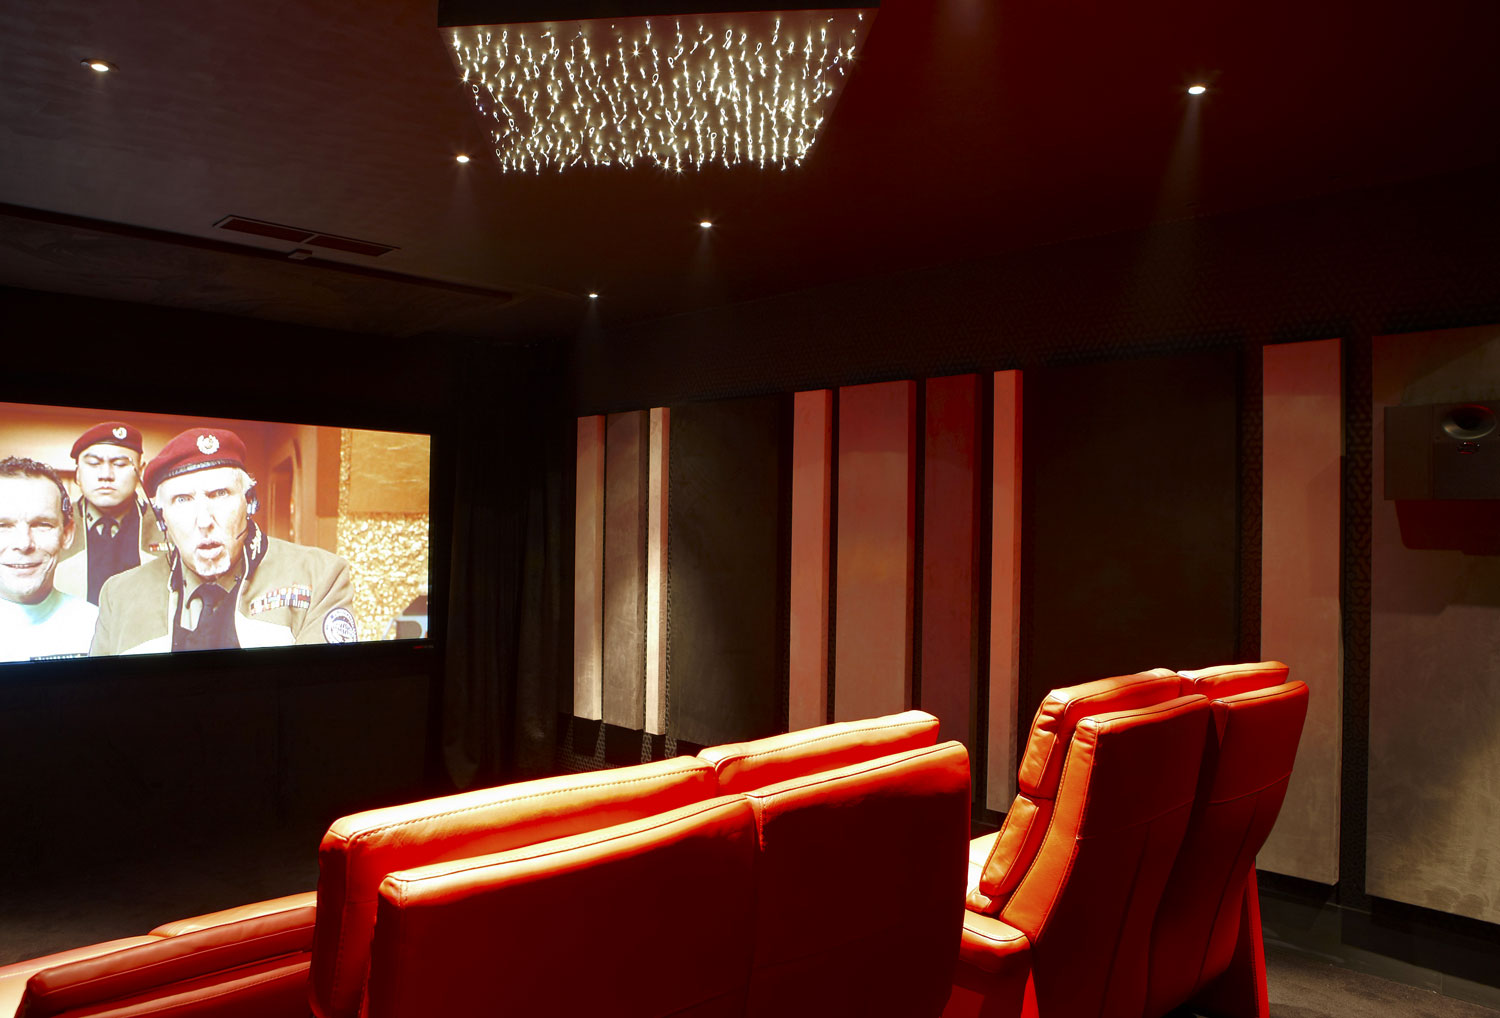 Private Residence Cinema Room with adjustable lighting system, Northwood, London | London Residential Photographers